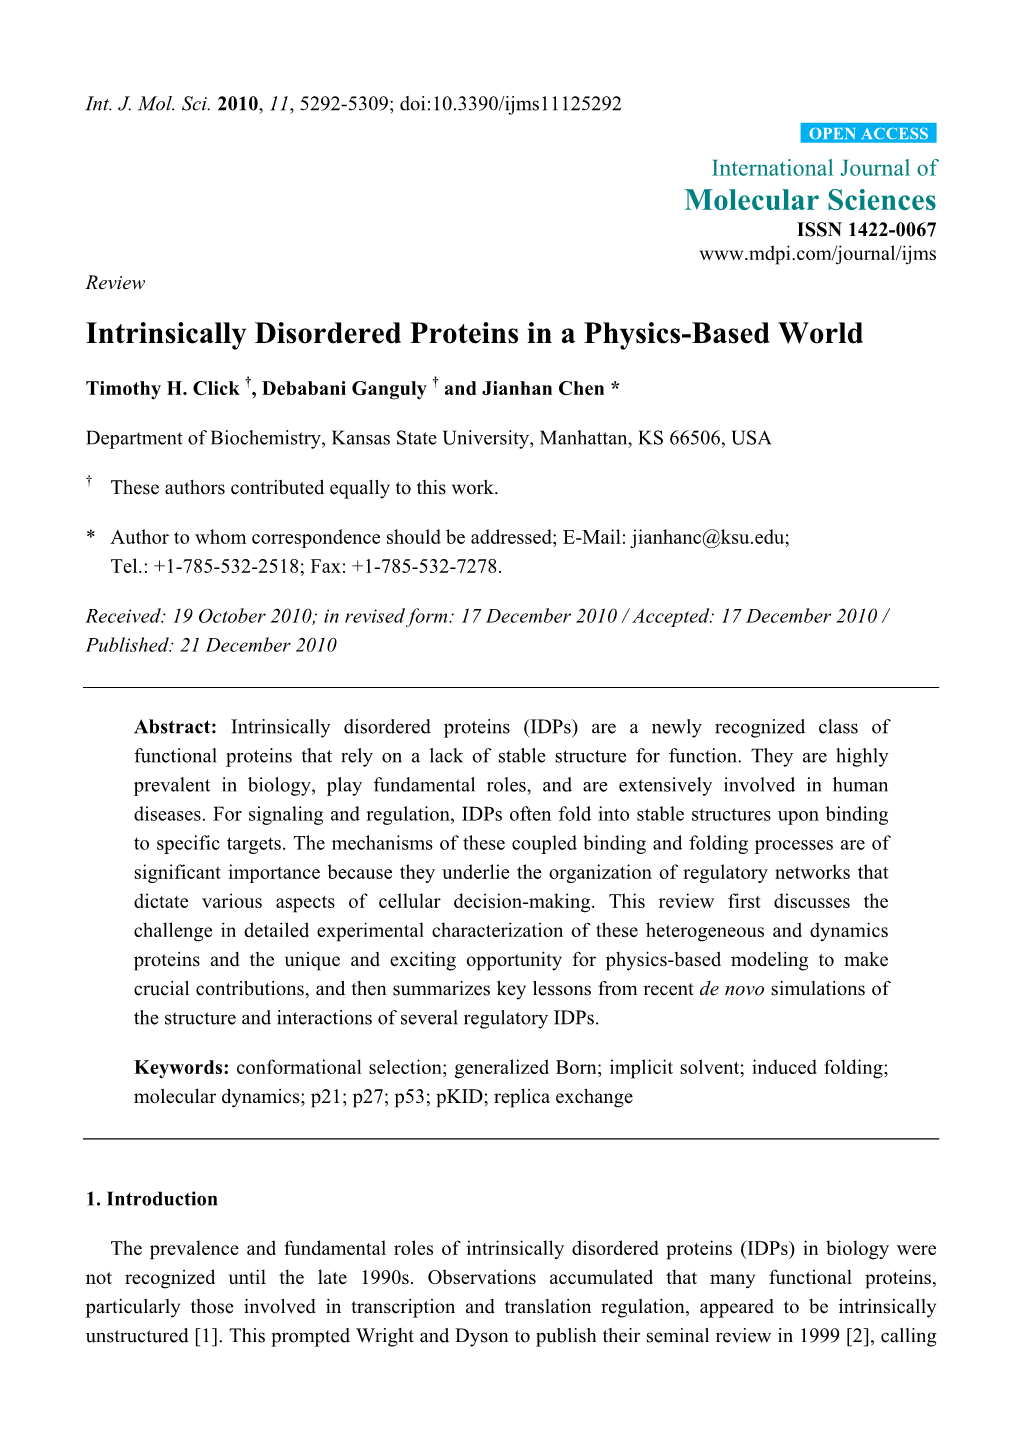 Intrinsically Disordered Proteins in a Physics-Based World